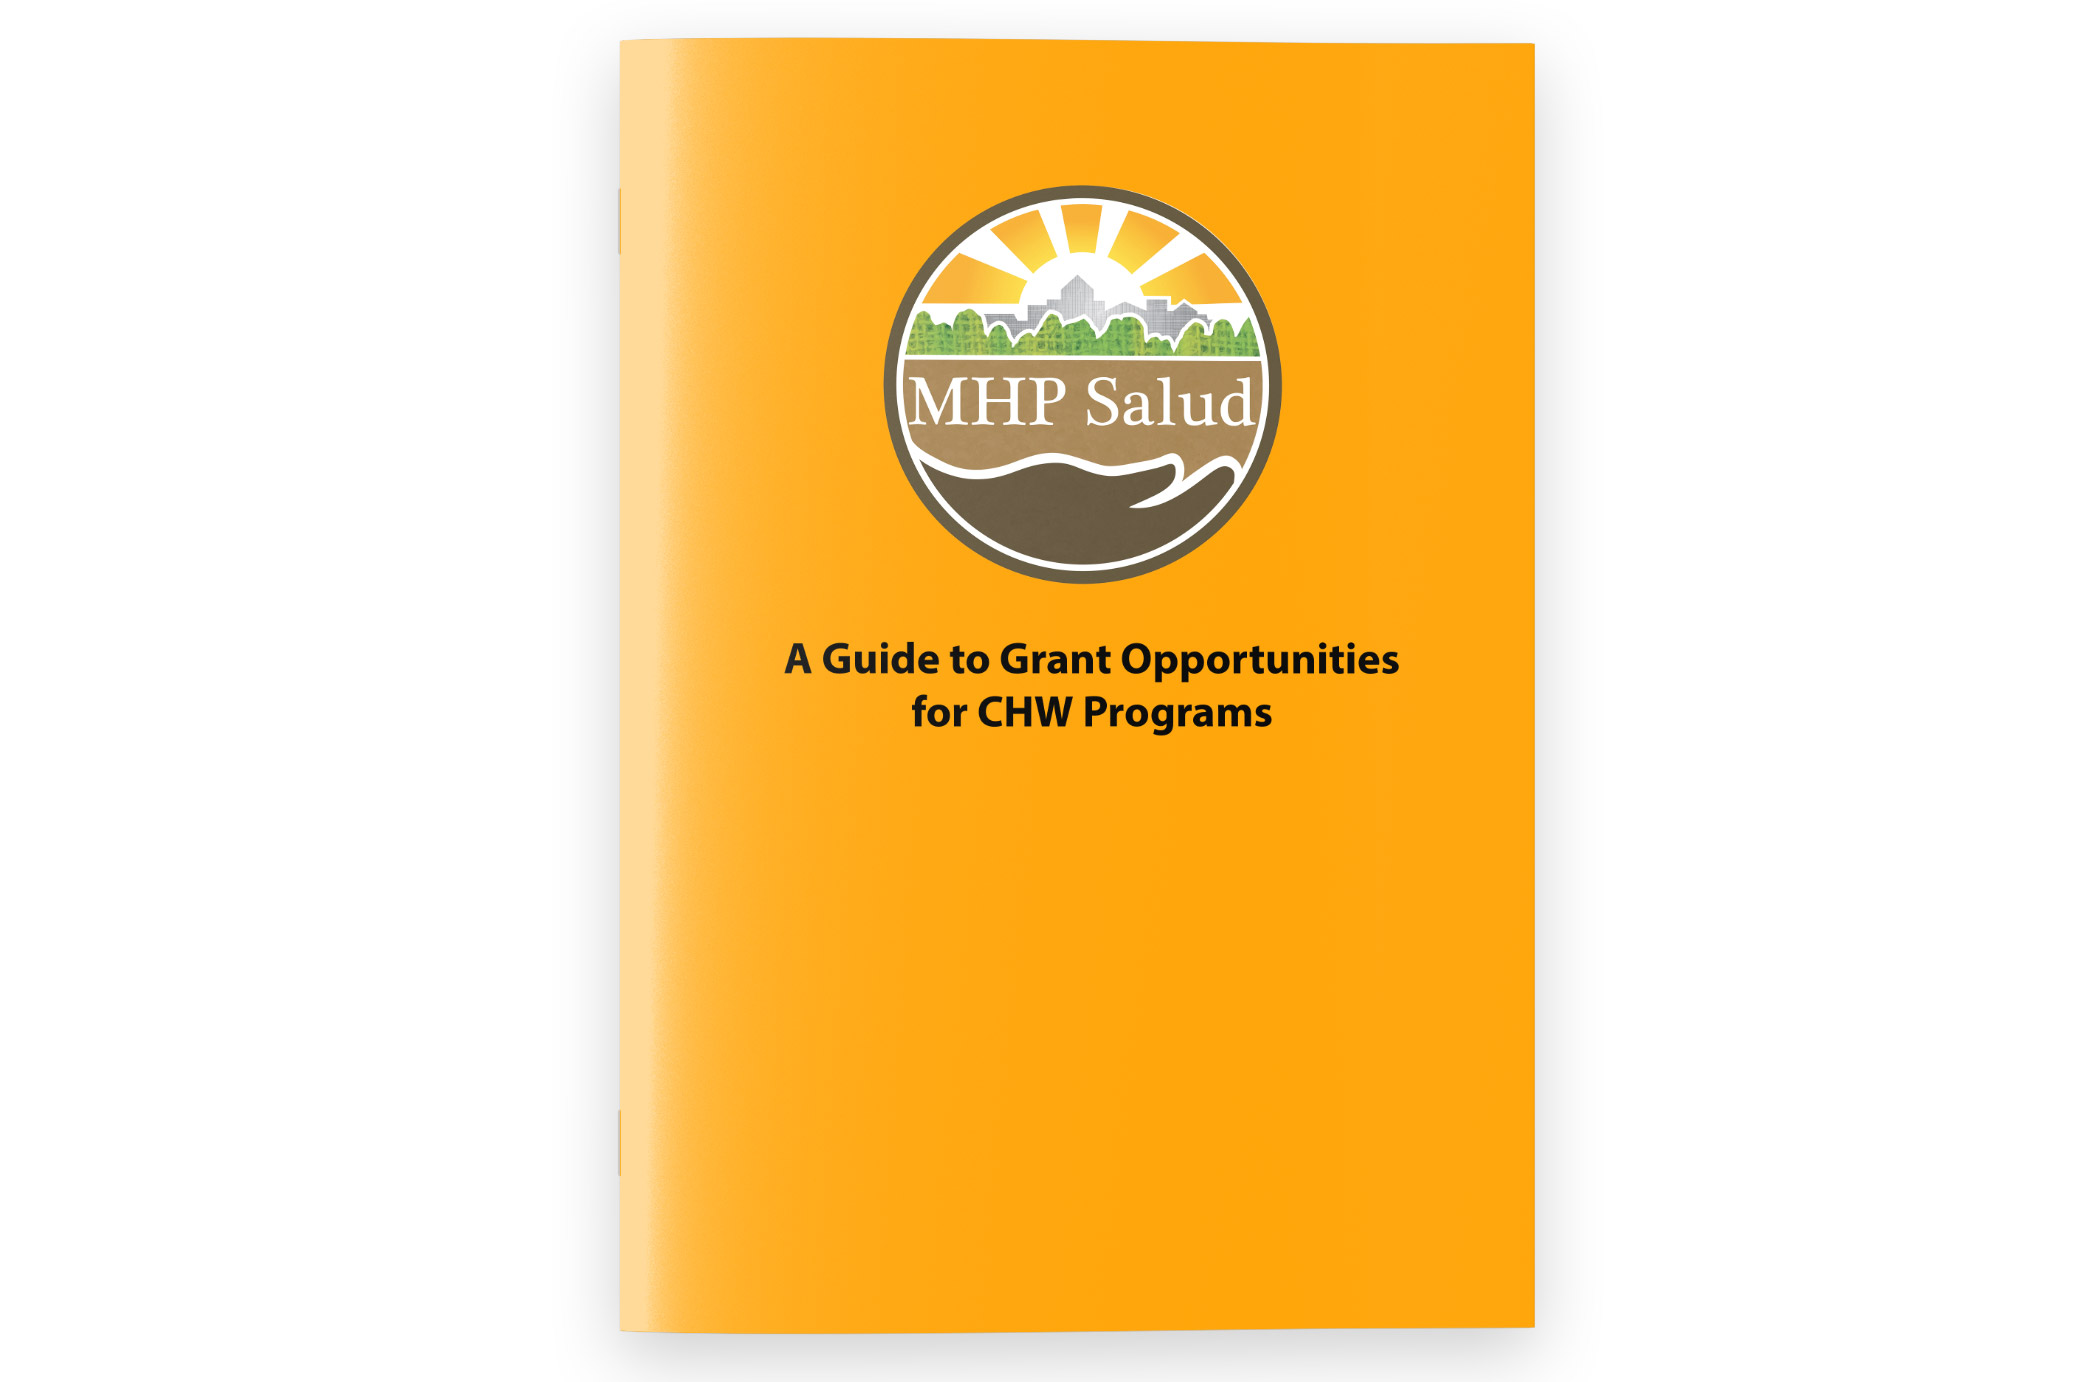 A Guide to Grant Opportunities for CHW Programs